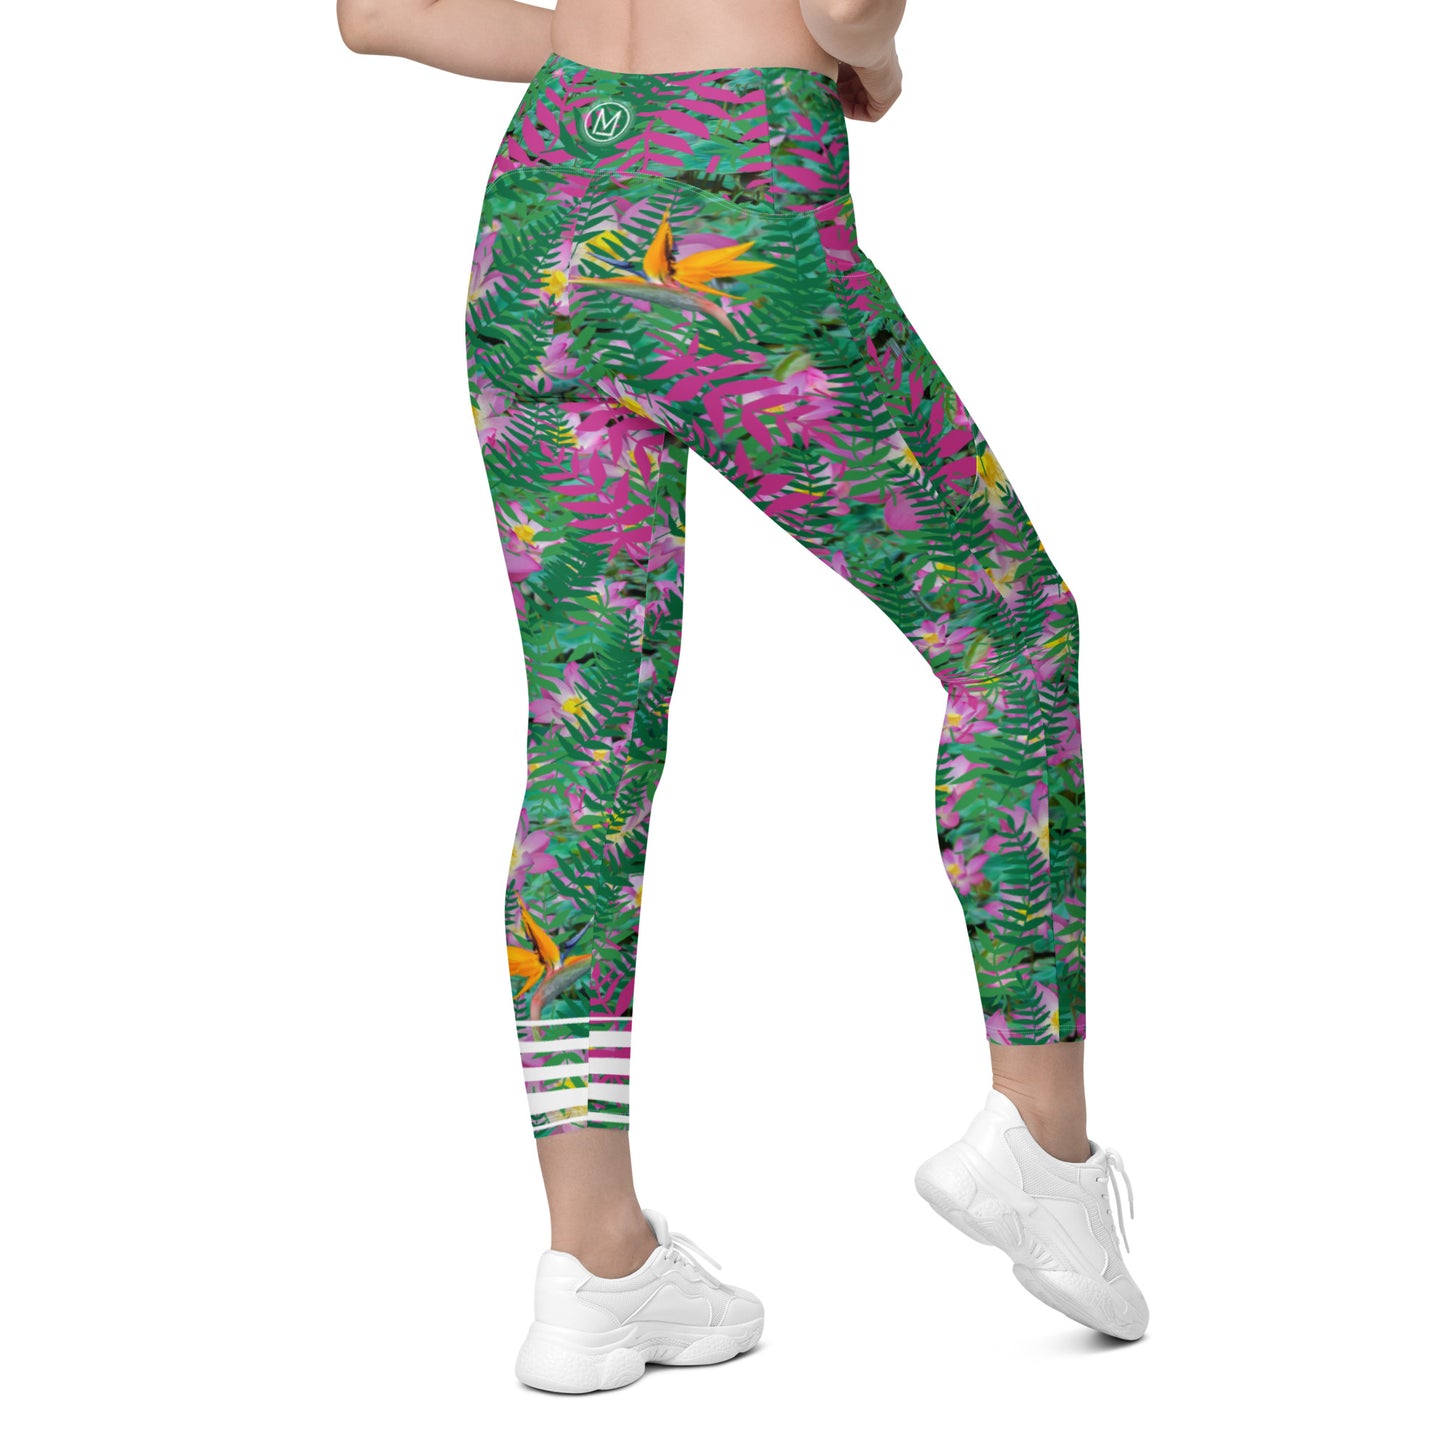 Leggings with pockets - FREE shipping!